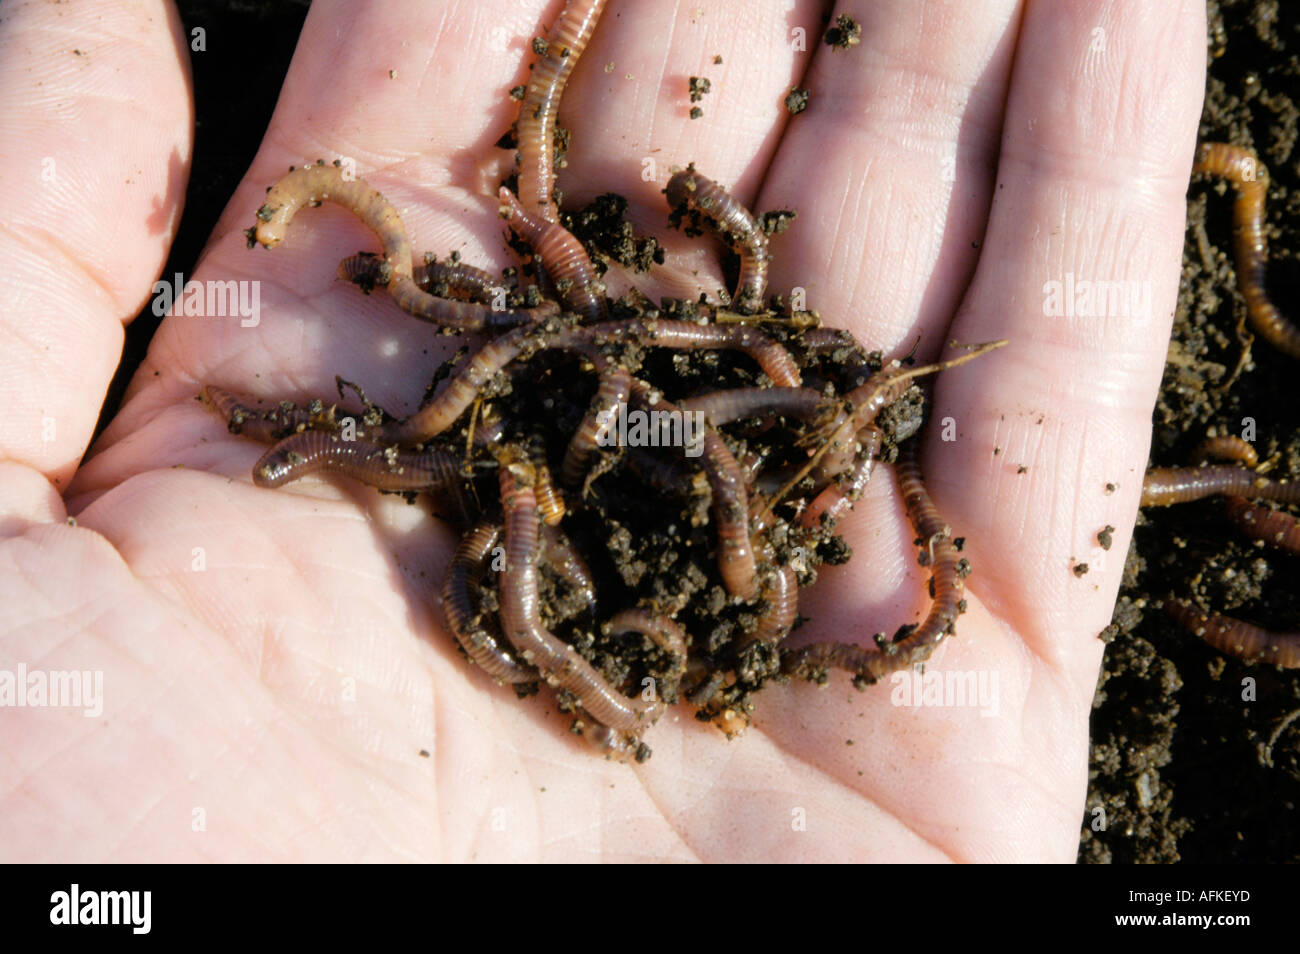 Tiger Worms In Garden Compost On Hand Stock Photo 7982652 Alamy